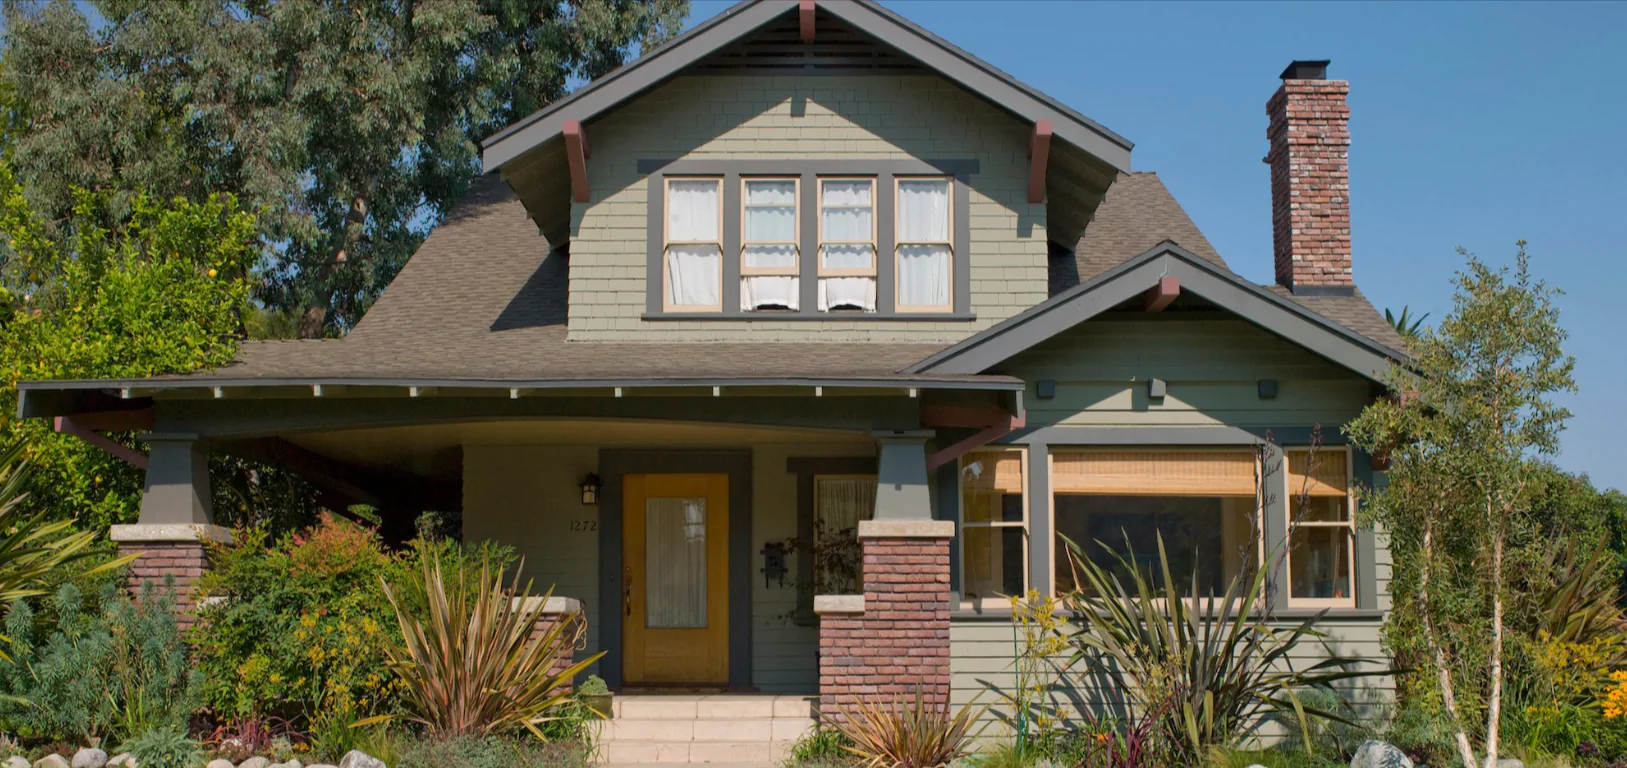 Tips for Qualifying for a First-Time Home Buyer Loan in California